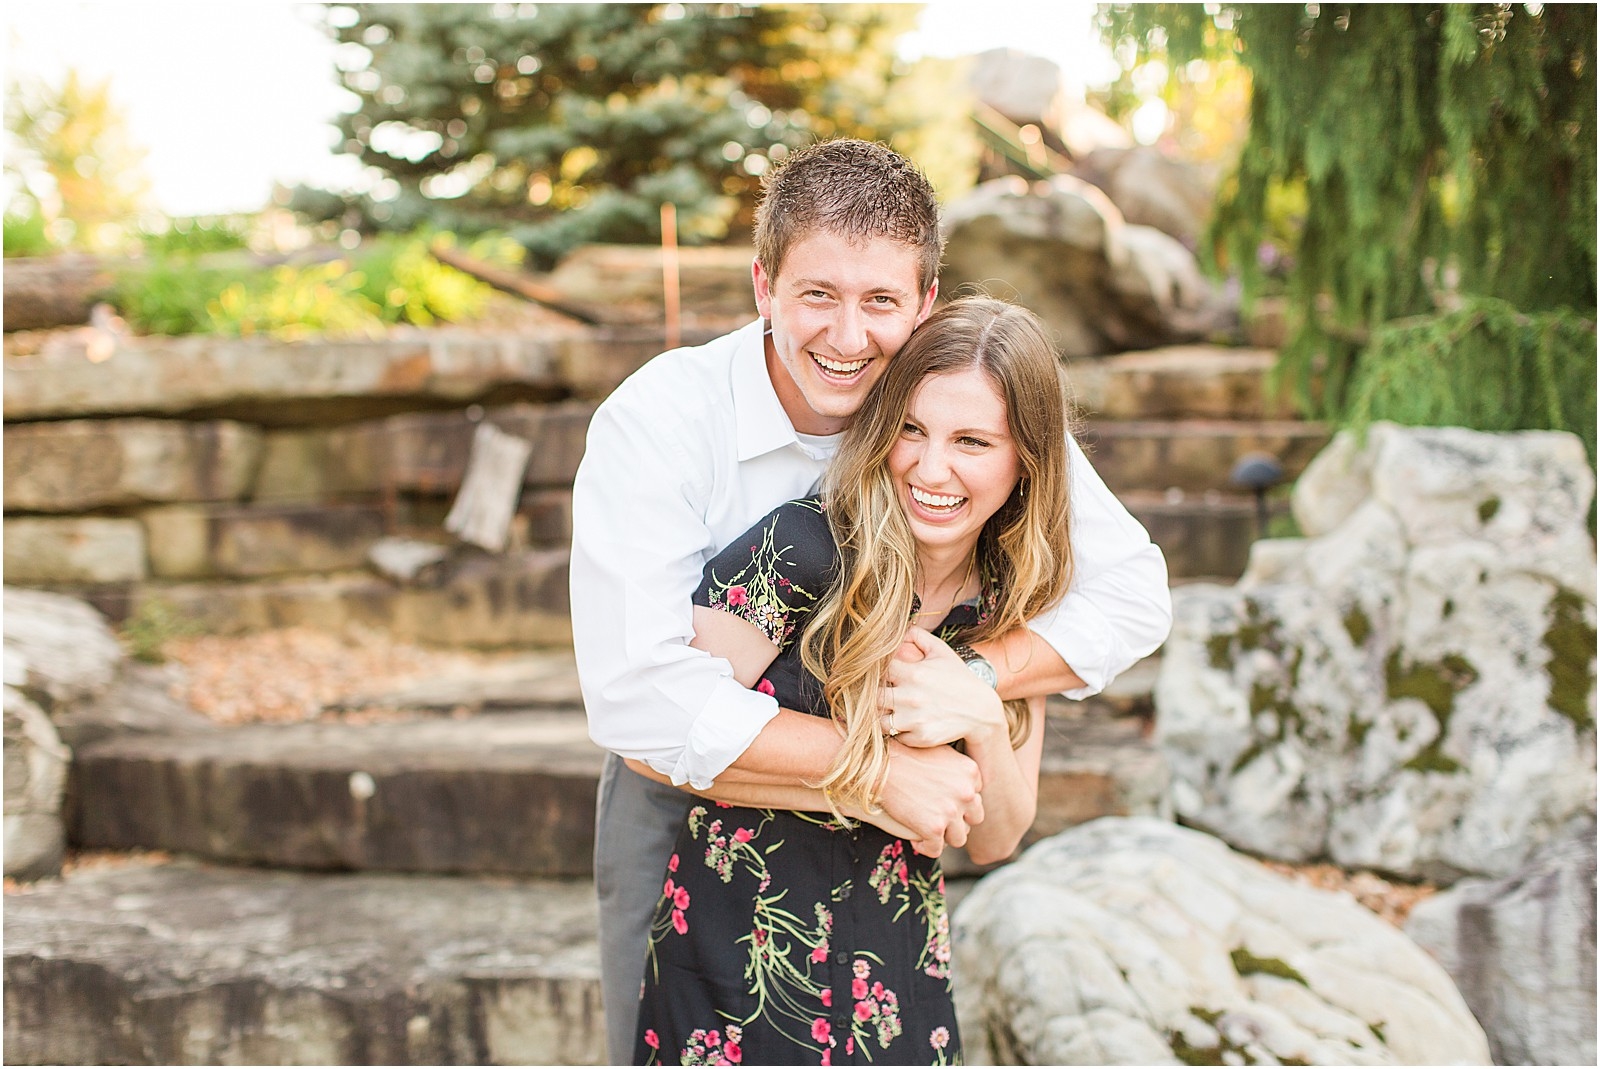 A Jasper Indiana Engagement Session | Tori and Kyle | Bret and Brandie Photography021.jpg